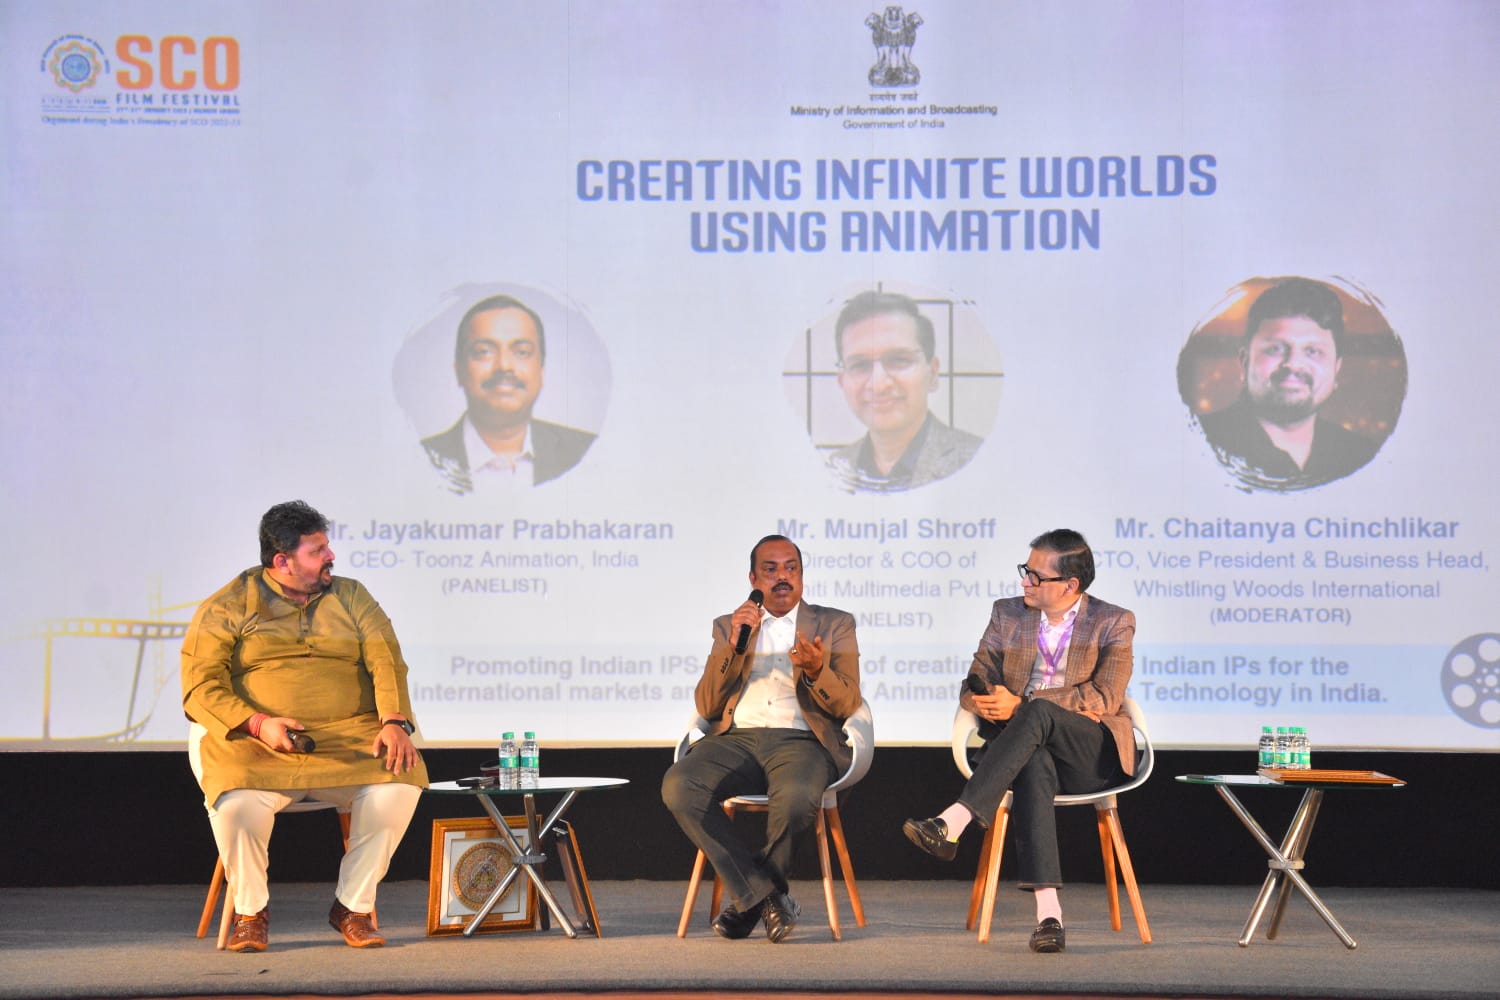  Panel Discussion on 'Creating Infinite Worlds using Animation' held at SCO Film Festival